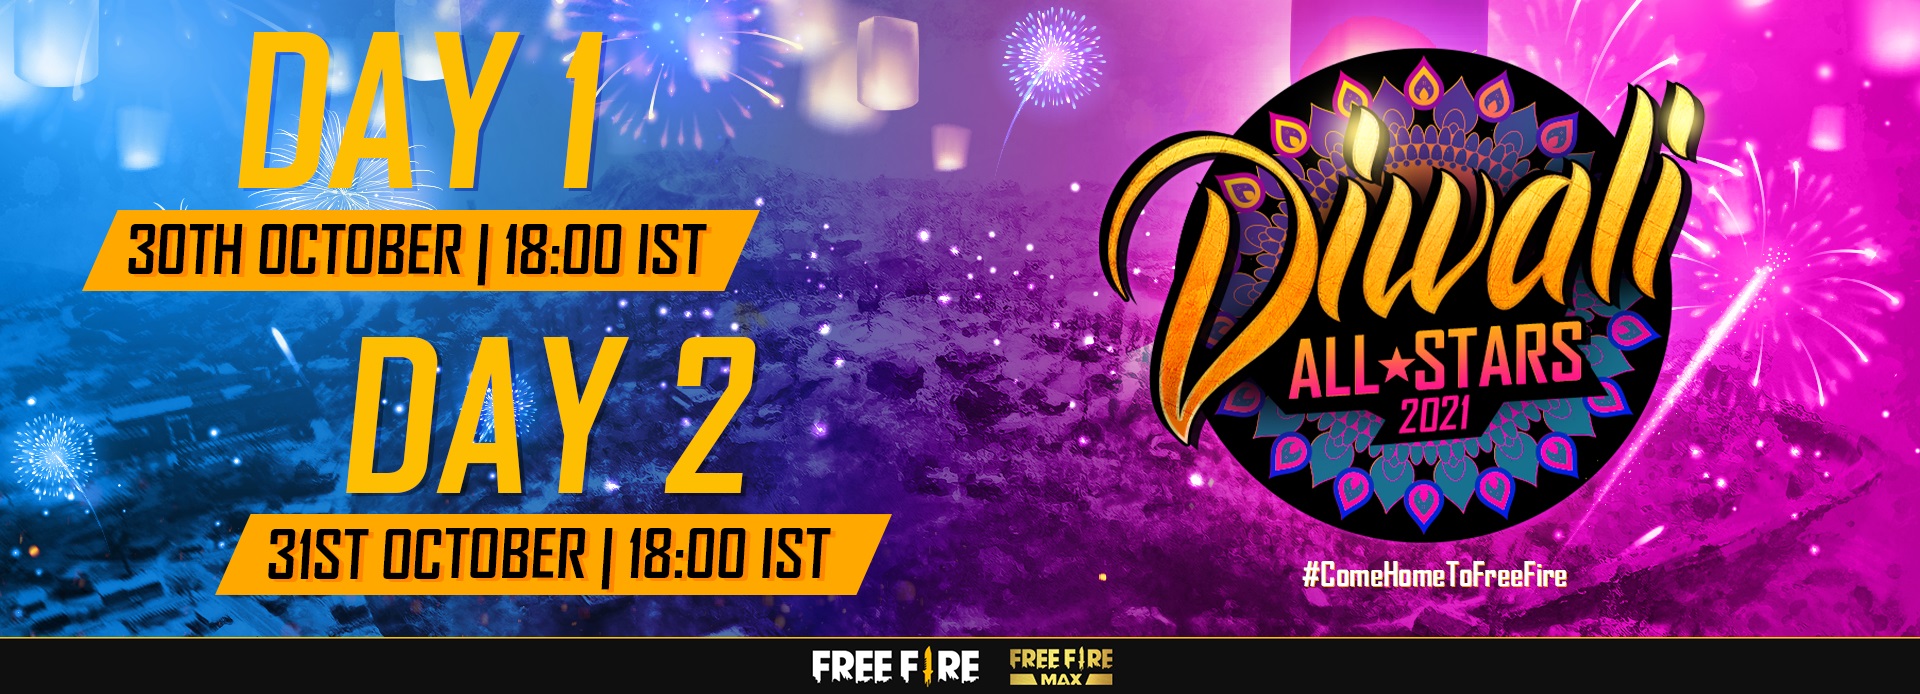 Free Fire Diwali All Stars 2021: Teams and Schedules